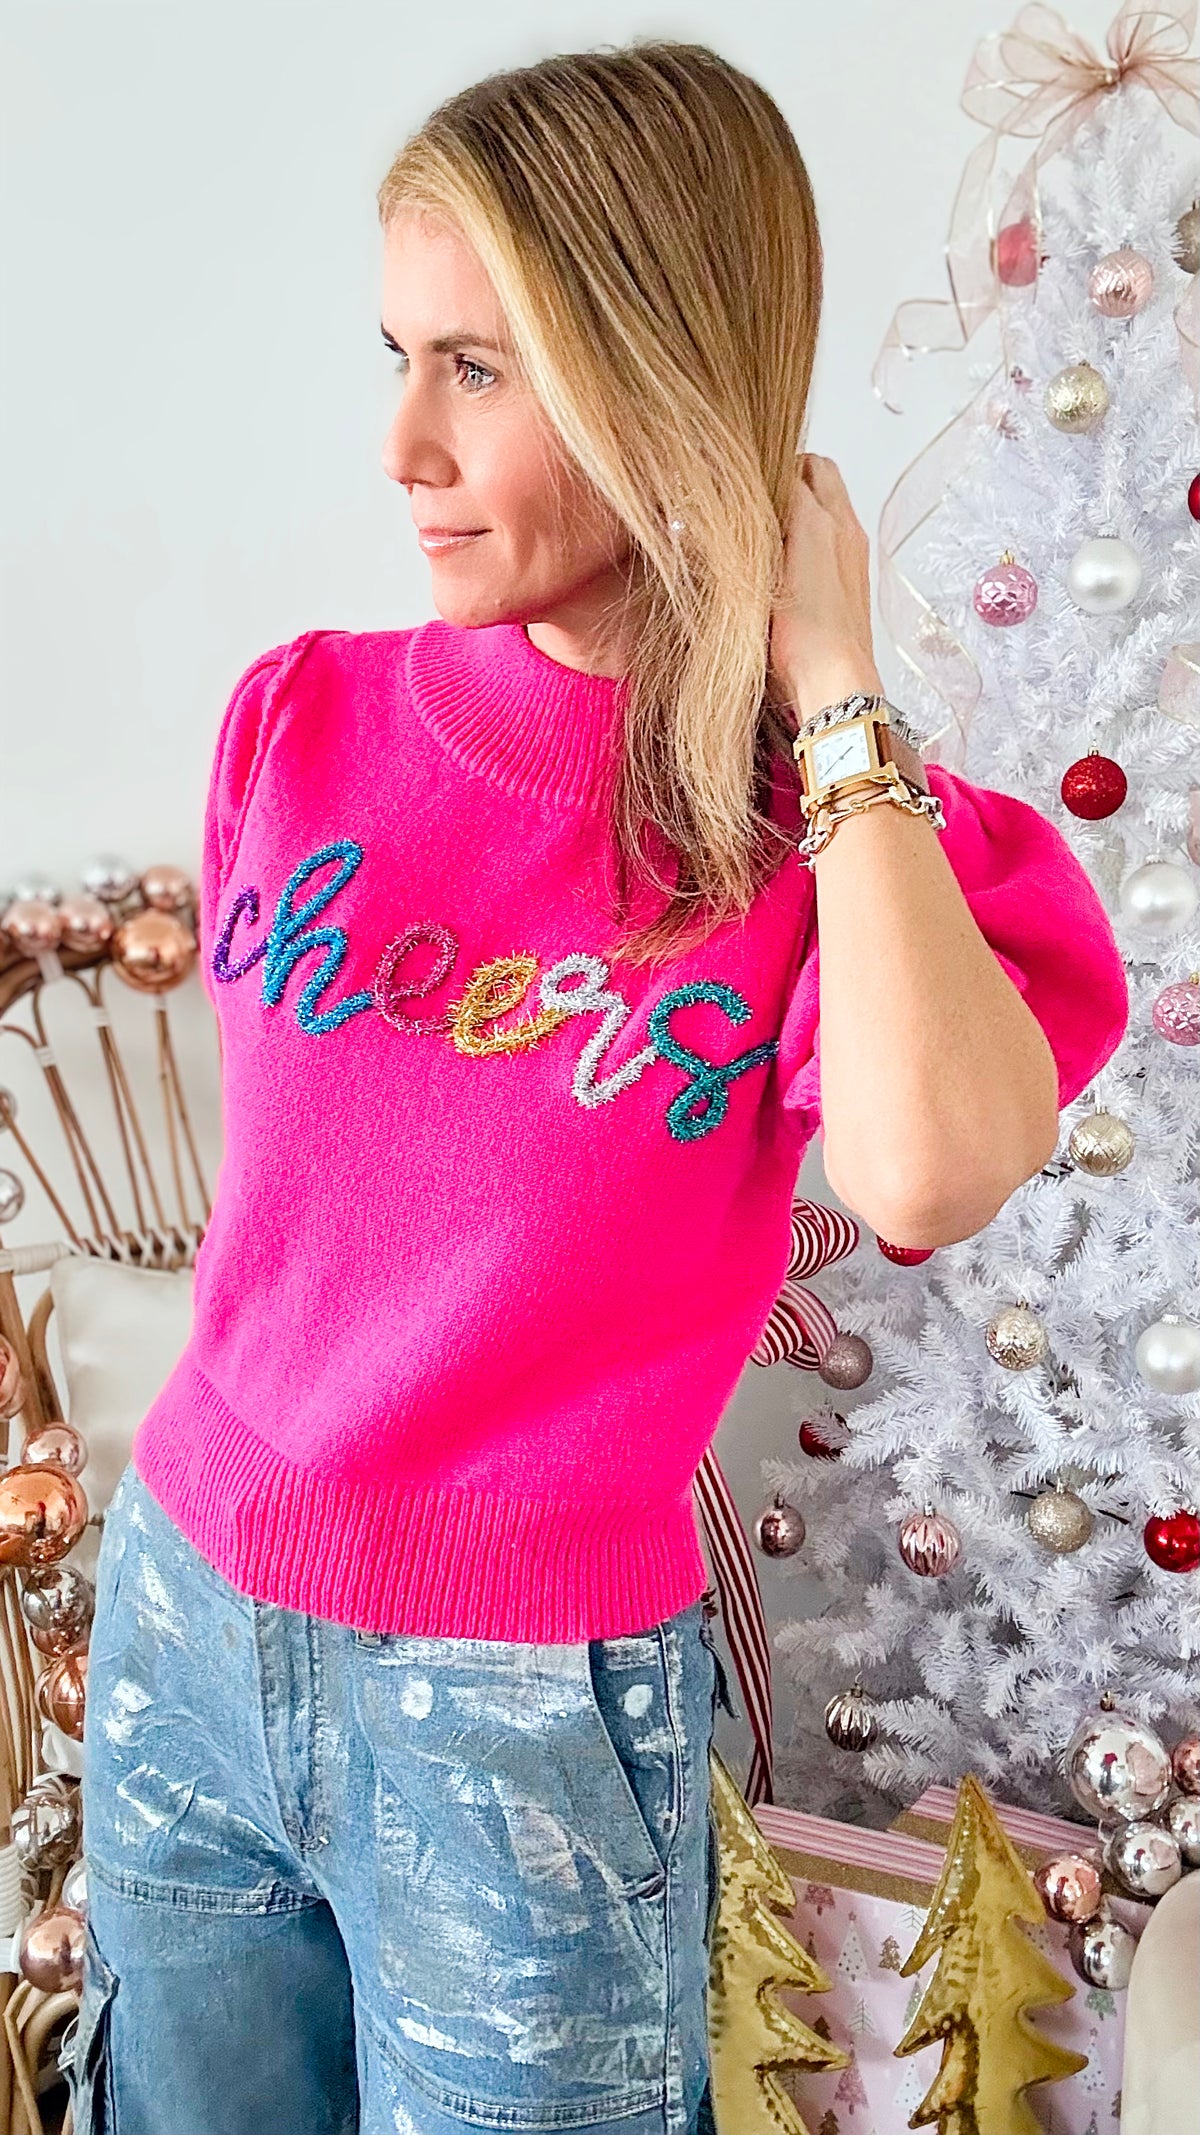 "Cheers" Lurex Embroidery Sweater - Deep Pink-140 Sweaters-Peach Love California-Coastal Bloom Boutique, find the trendiest versions of the popular styles and looks Located in Indialantic, FL